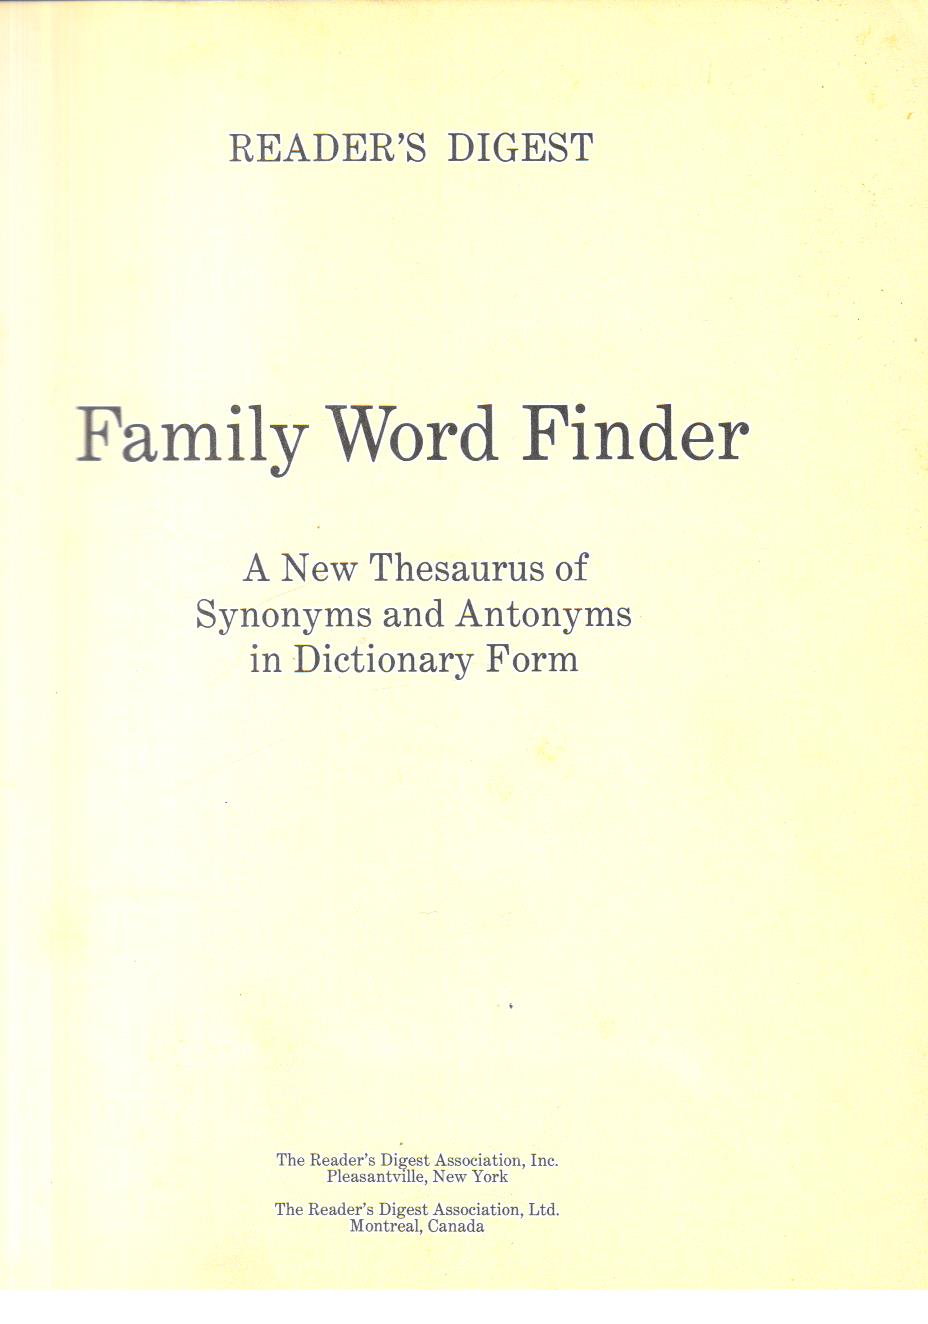 Family Word Finder a new thesaurus of synonyms and antonyms in dictionary form.